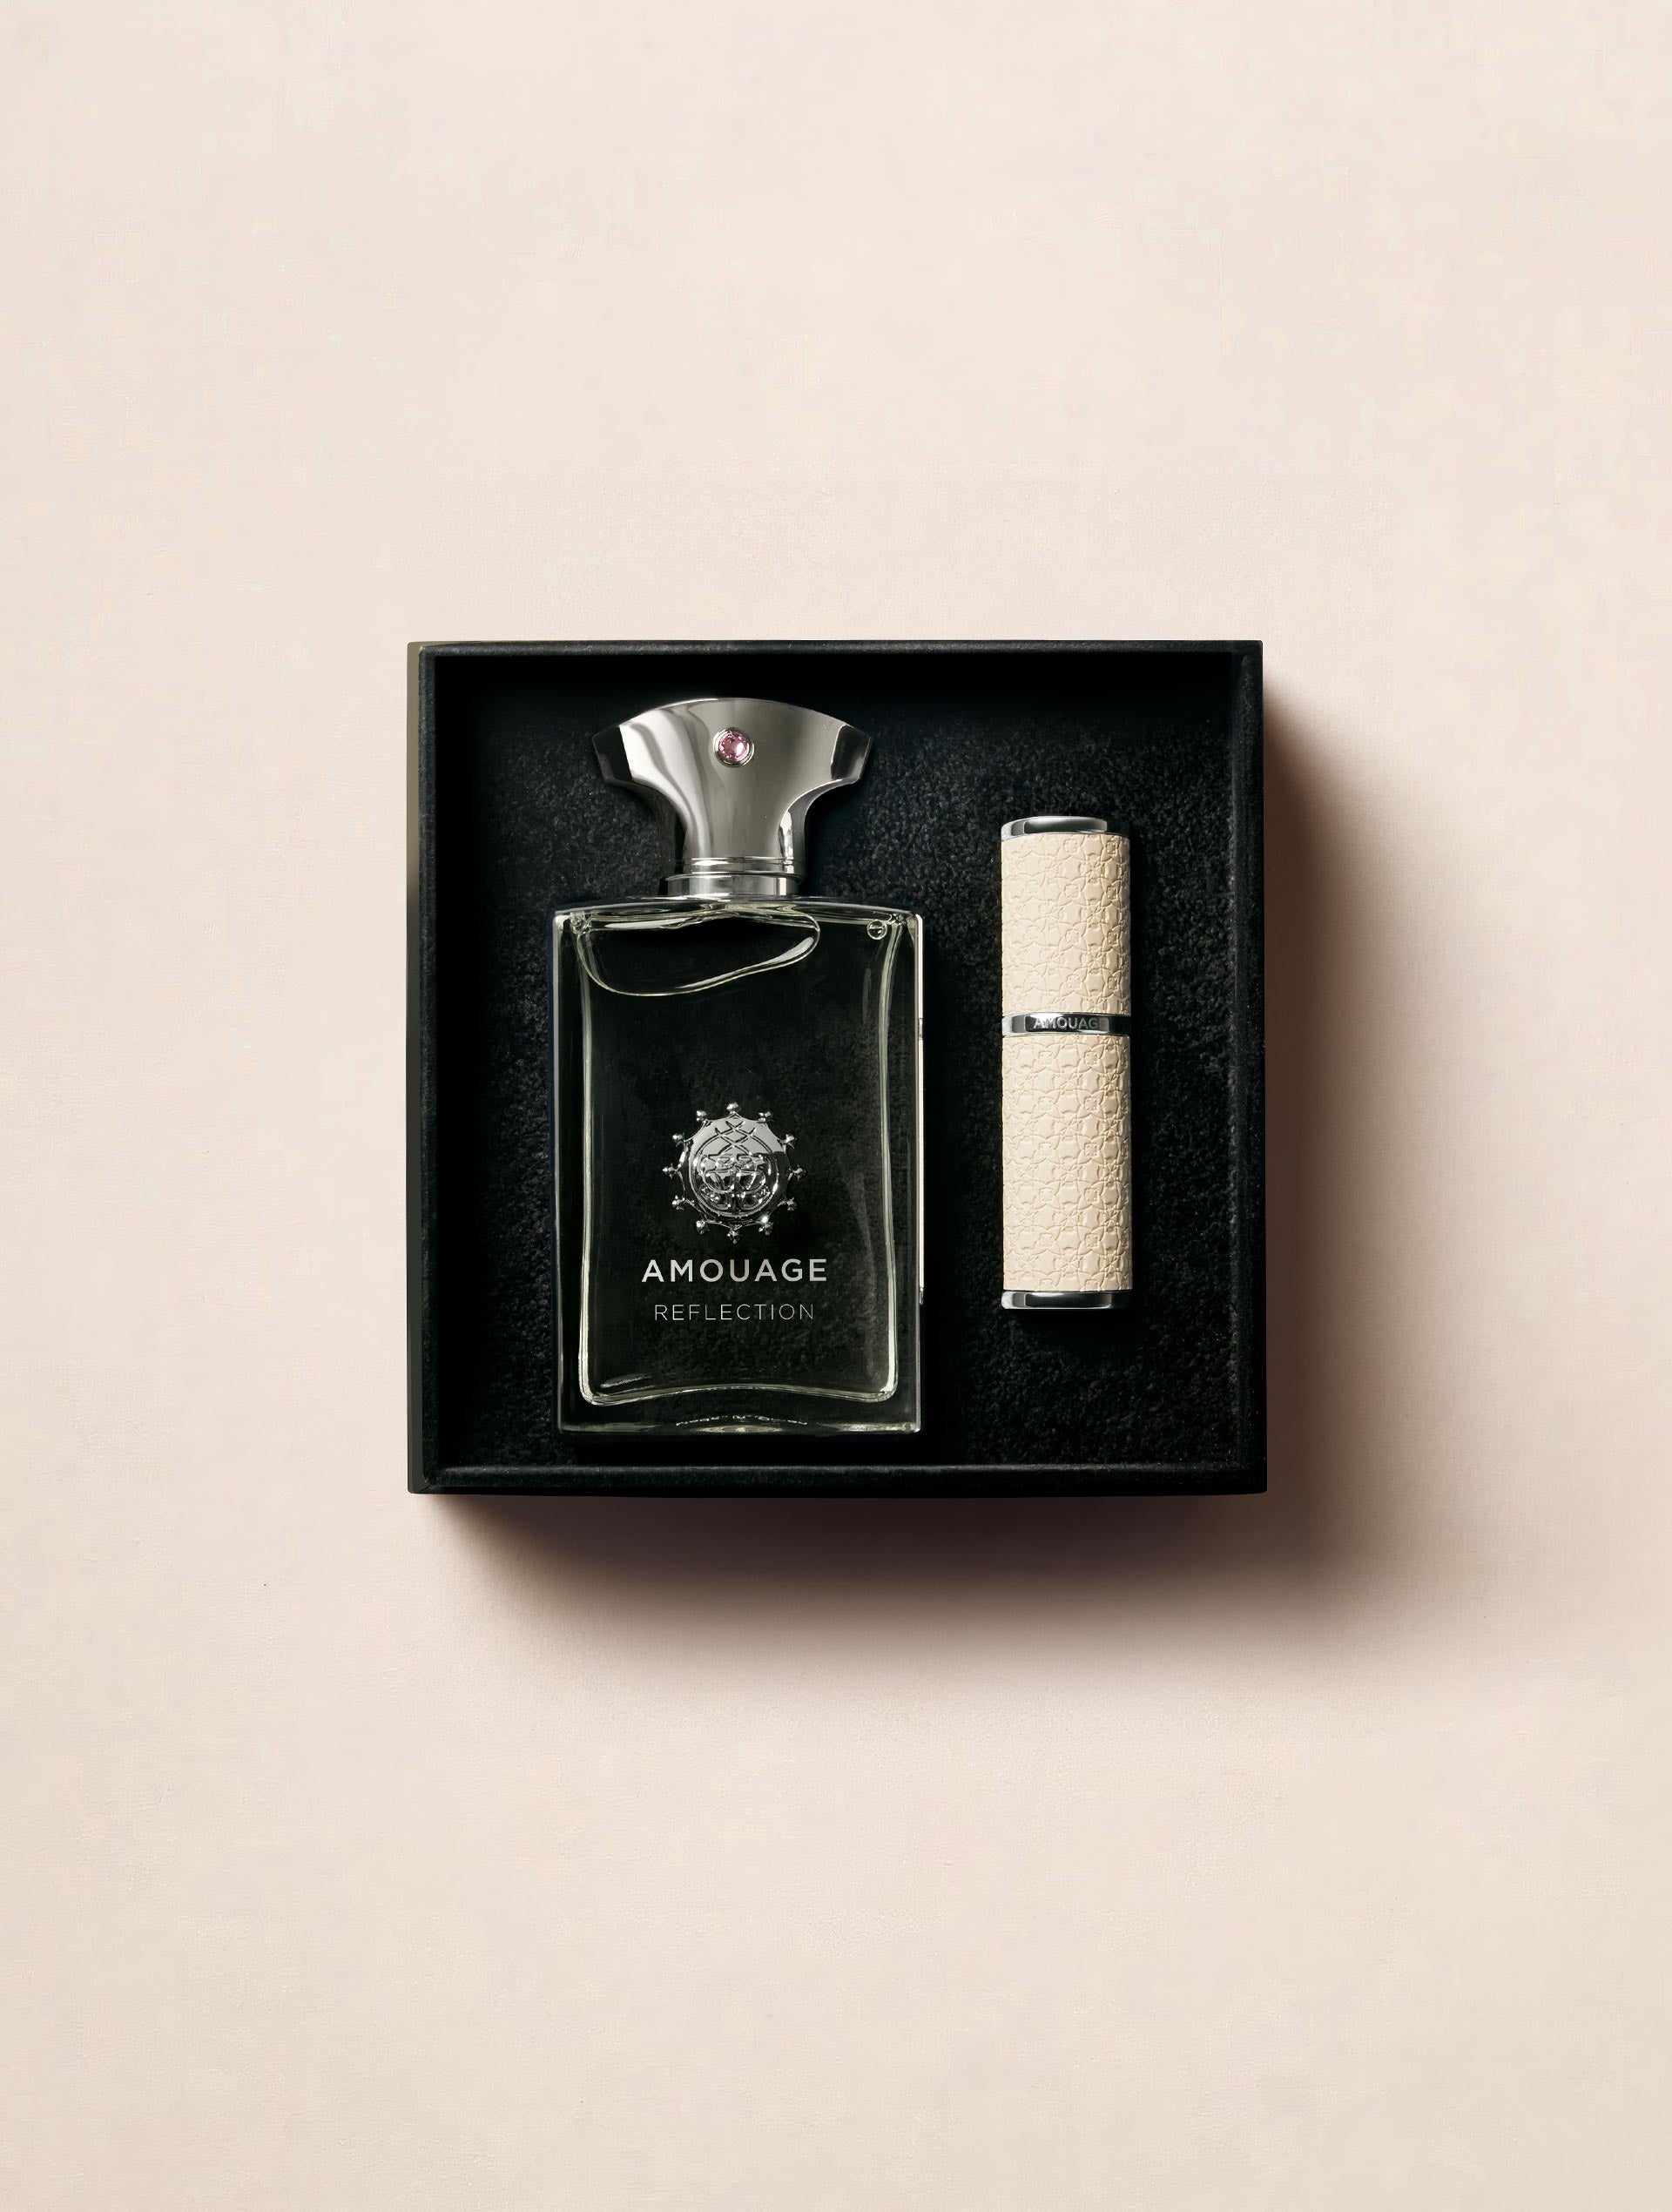 New Arrivals – The House of Amouage